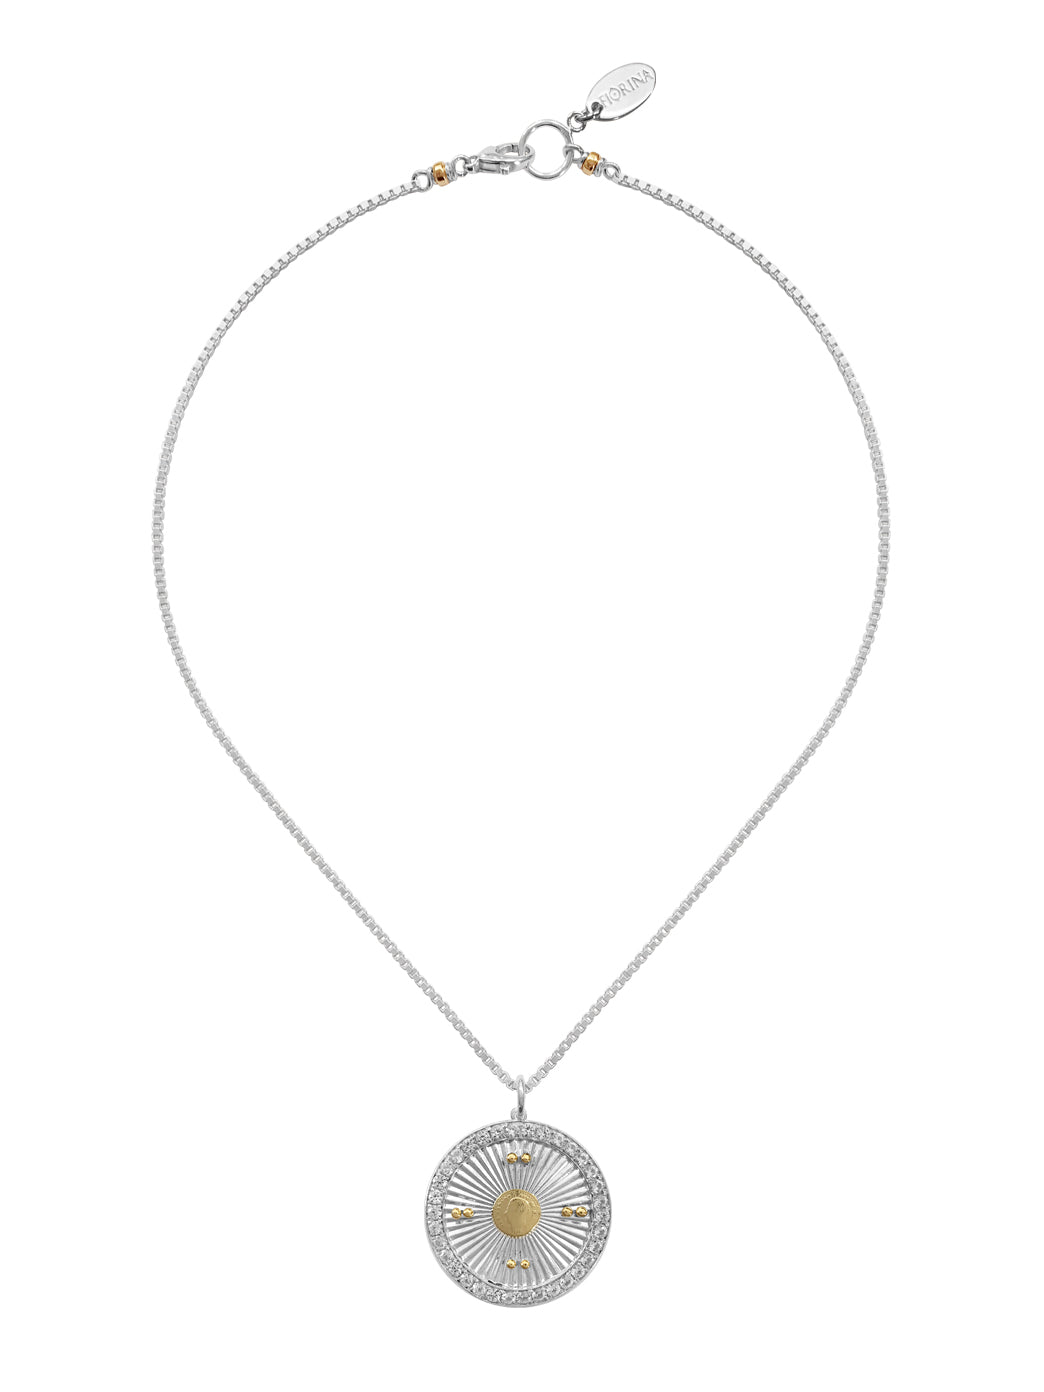 Fiorina Jewellery Sunray Necklace White Spinel Coin